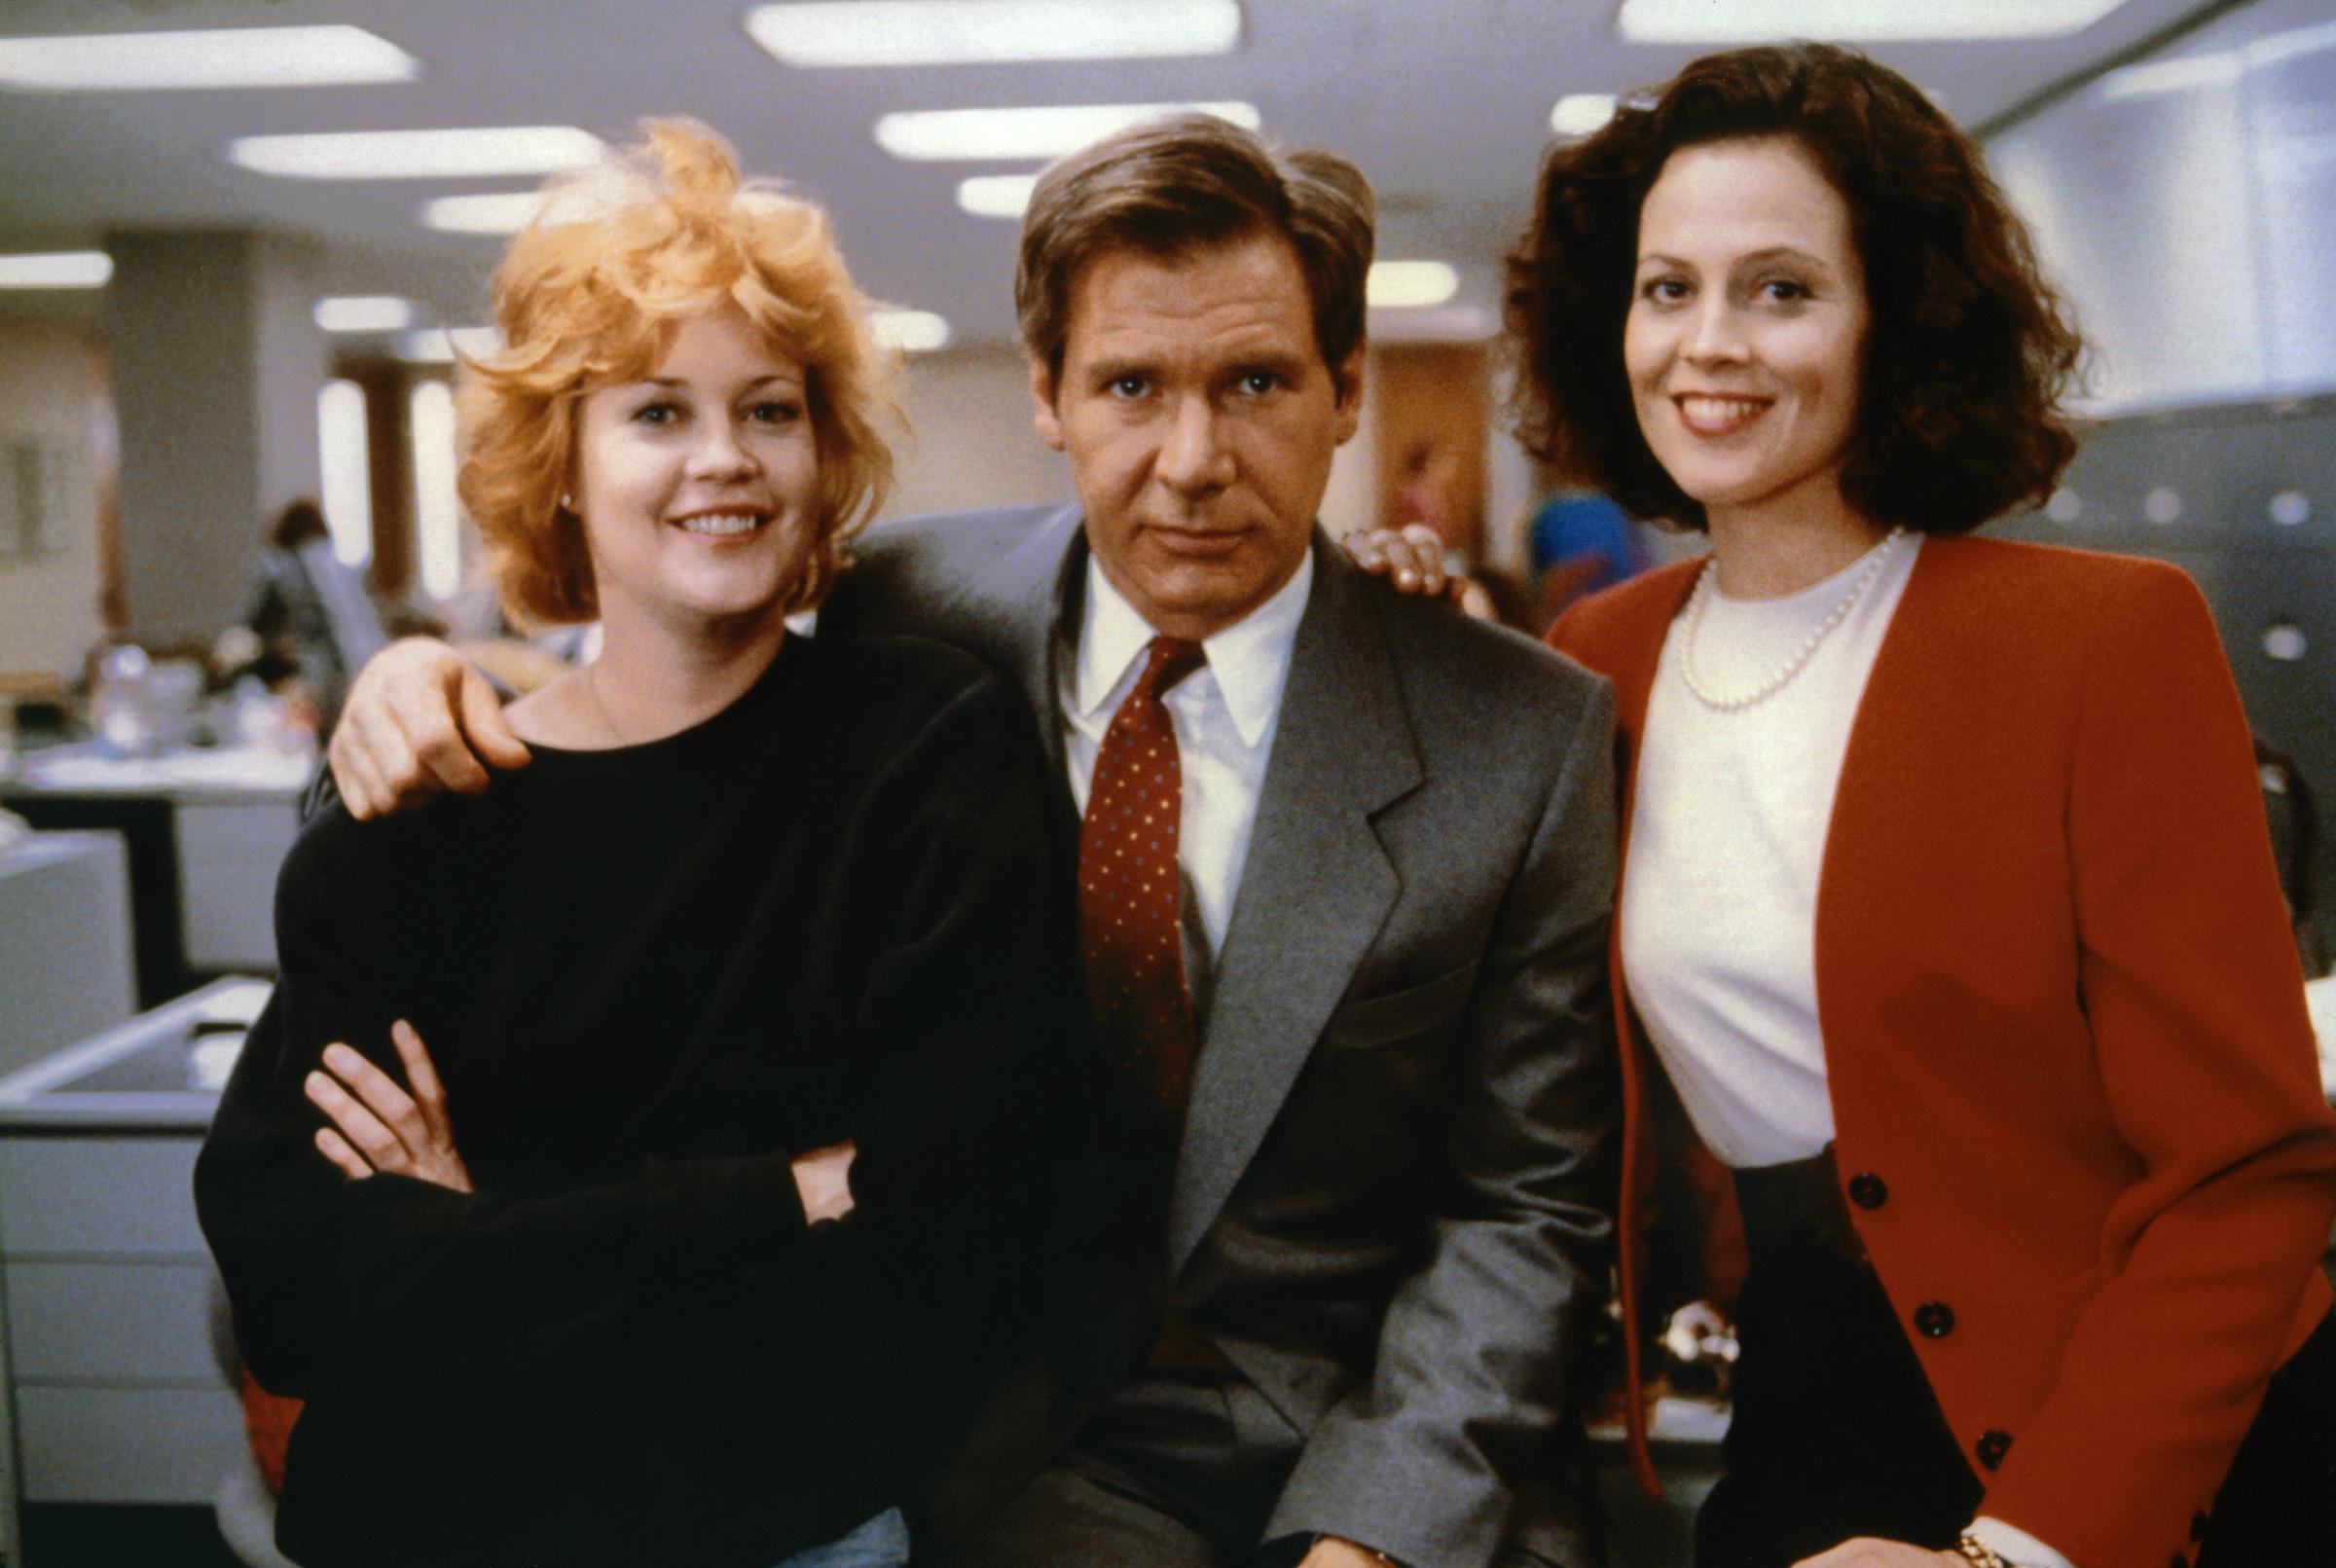 Melanie Griffith, Harrison Ford and Sigourney Weaver on the set of "Working Girl," 1988 | Source: Getty Images